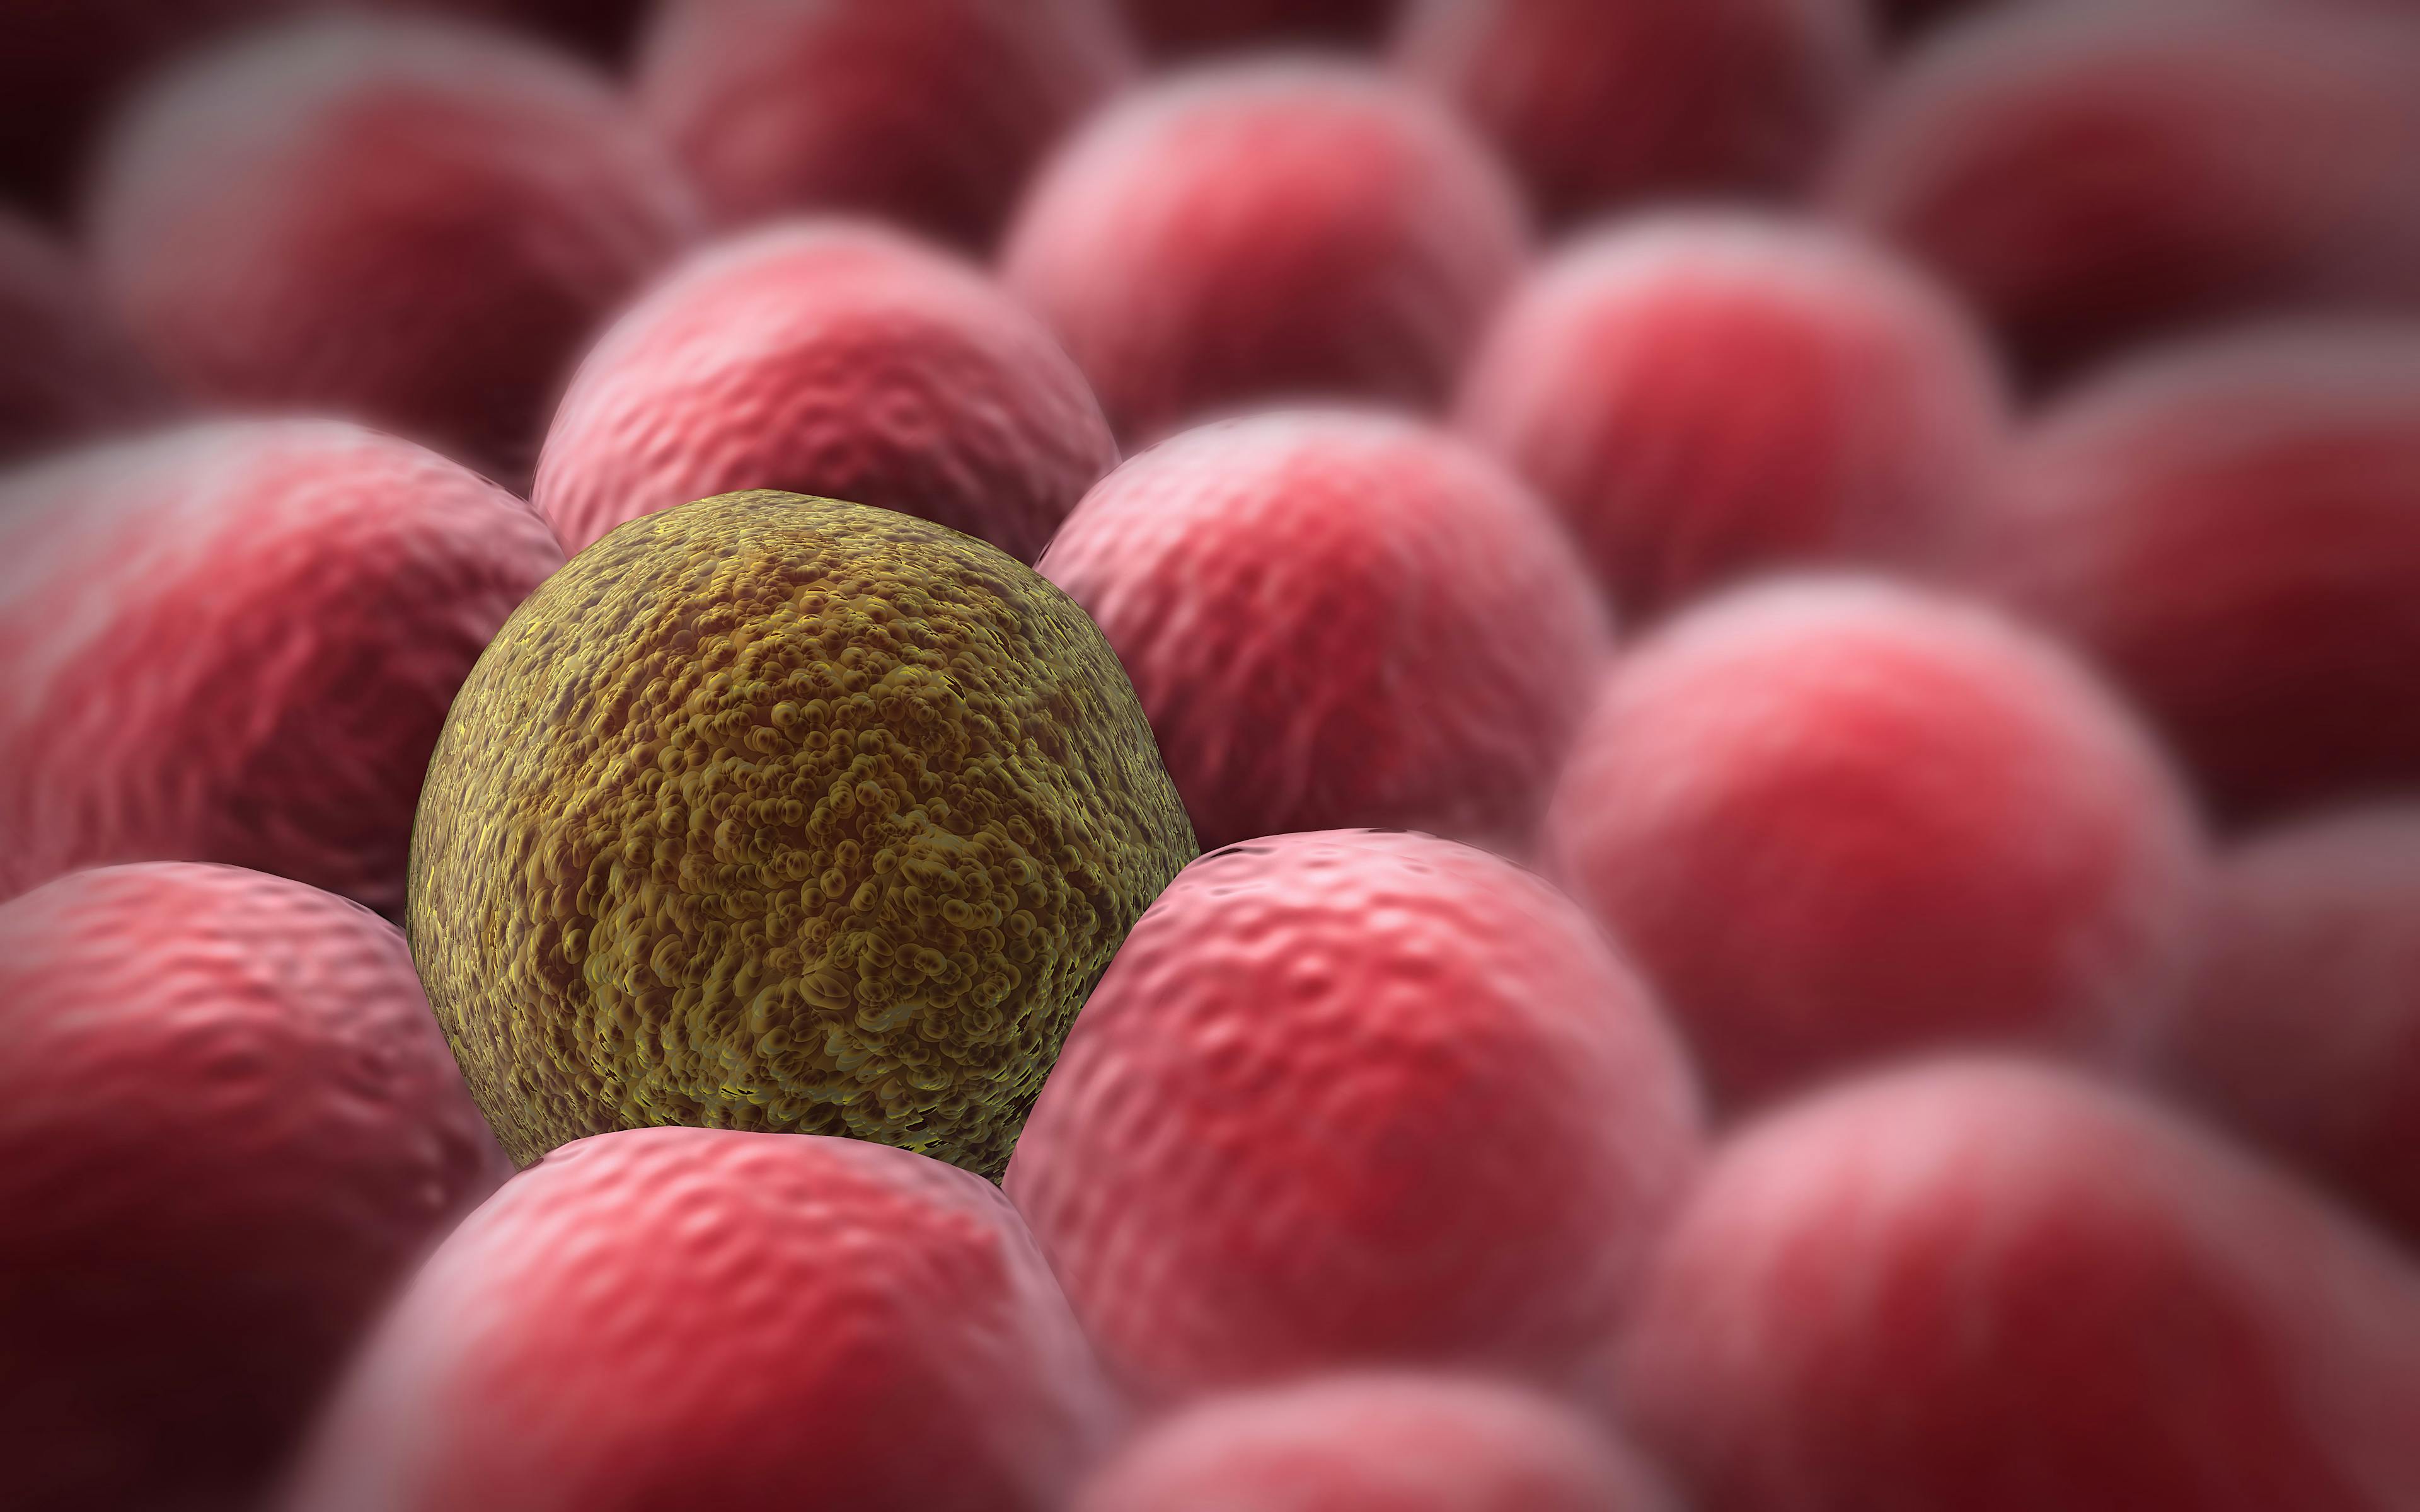 T-Cell Therapy Gets Orphan Drug Designation for Pancreatic Cancer